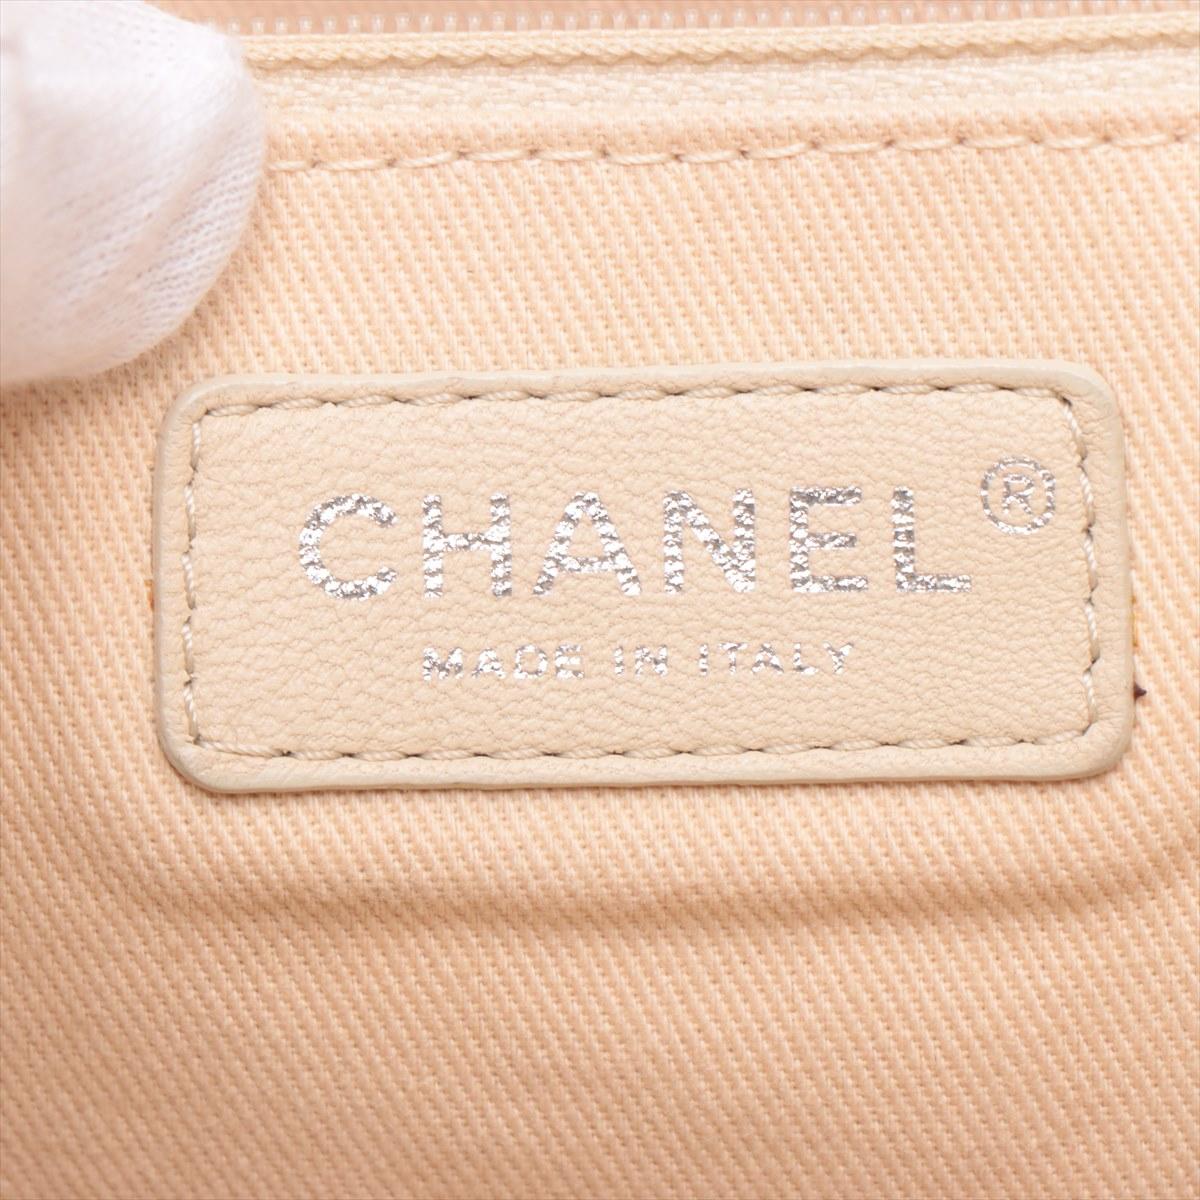 Chanel Canvas Deauville Tote Bag Light Beige For Sale 7